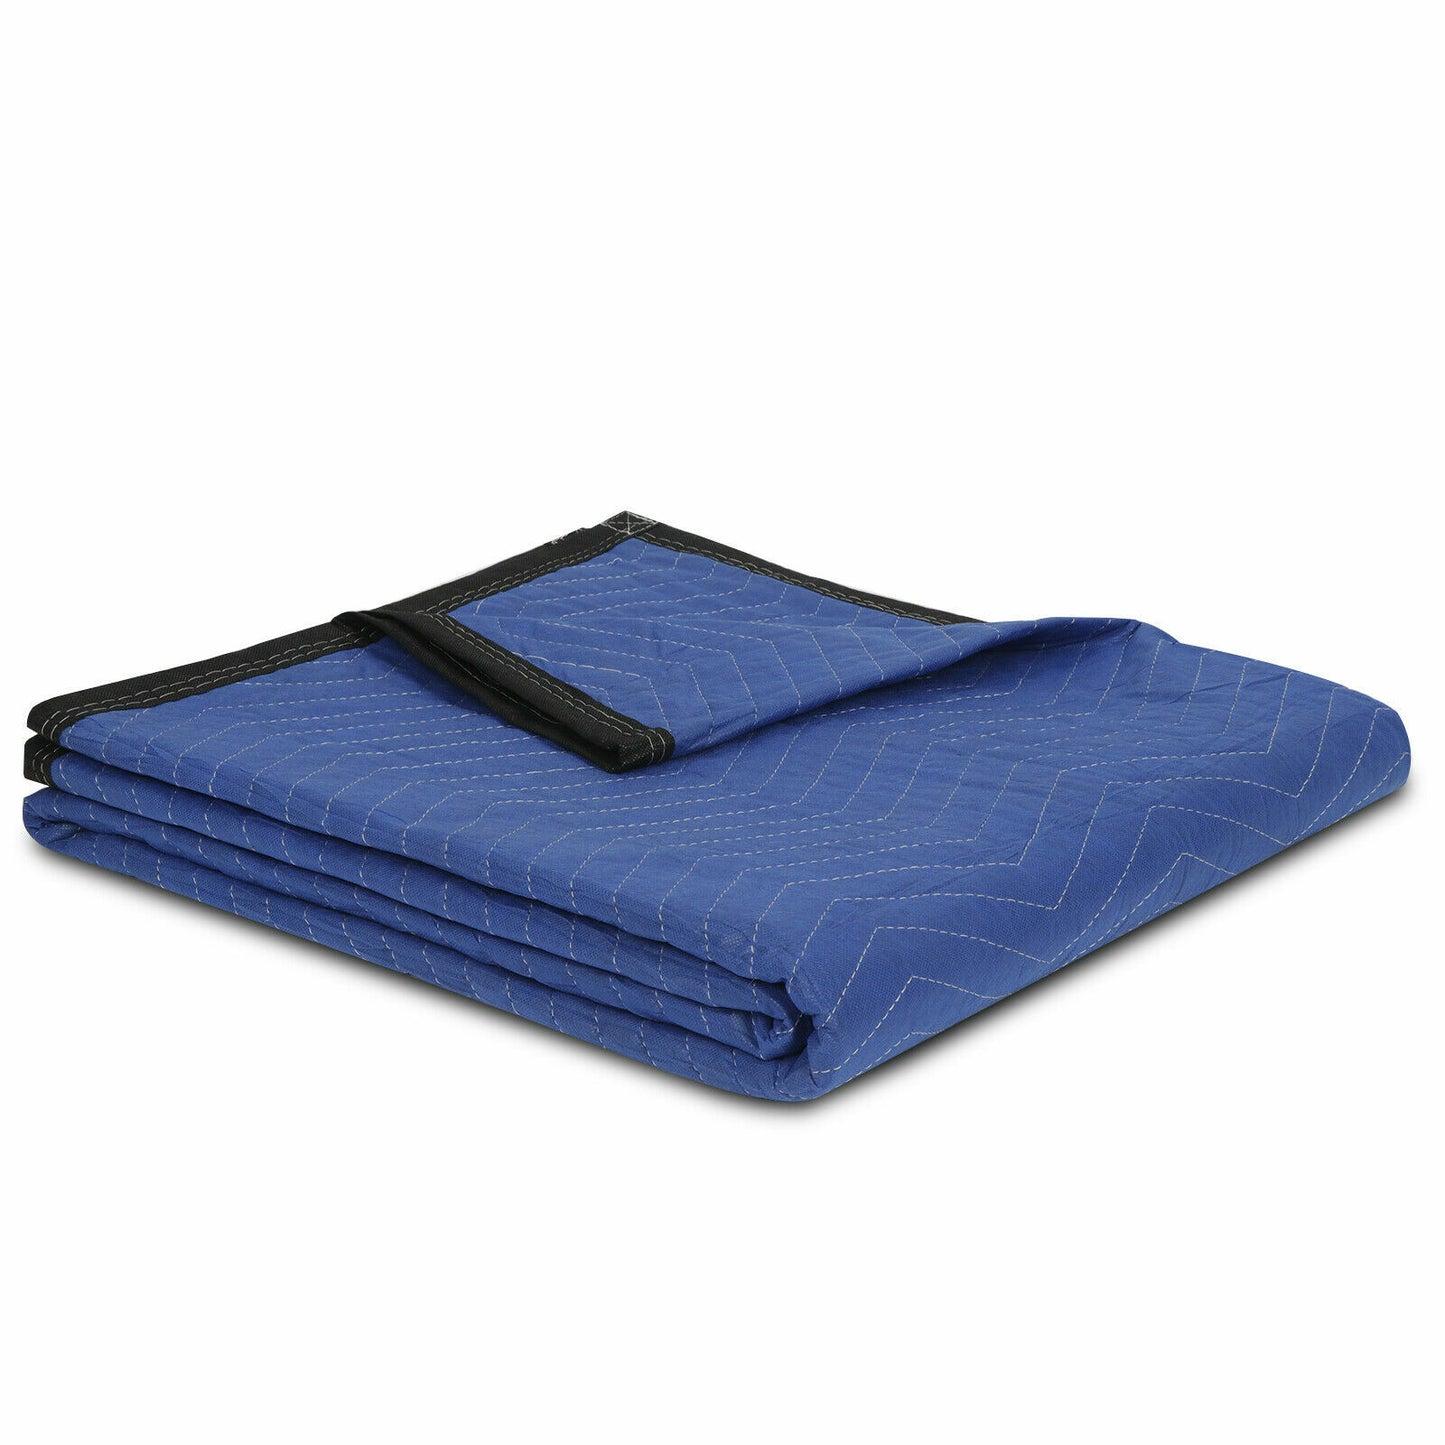 48 Pack Moving Blankets 80" x 72" Pro Economy Blue Shipping Furniture Pads